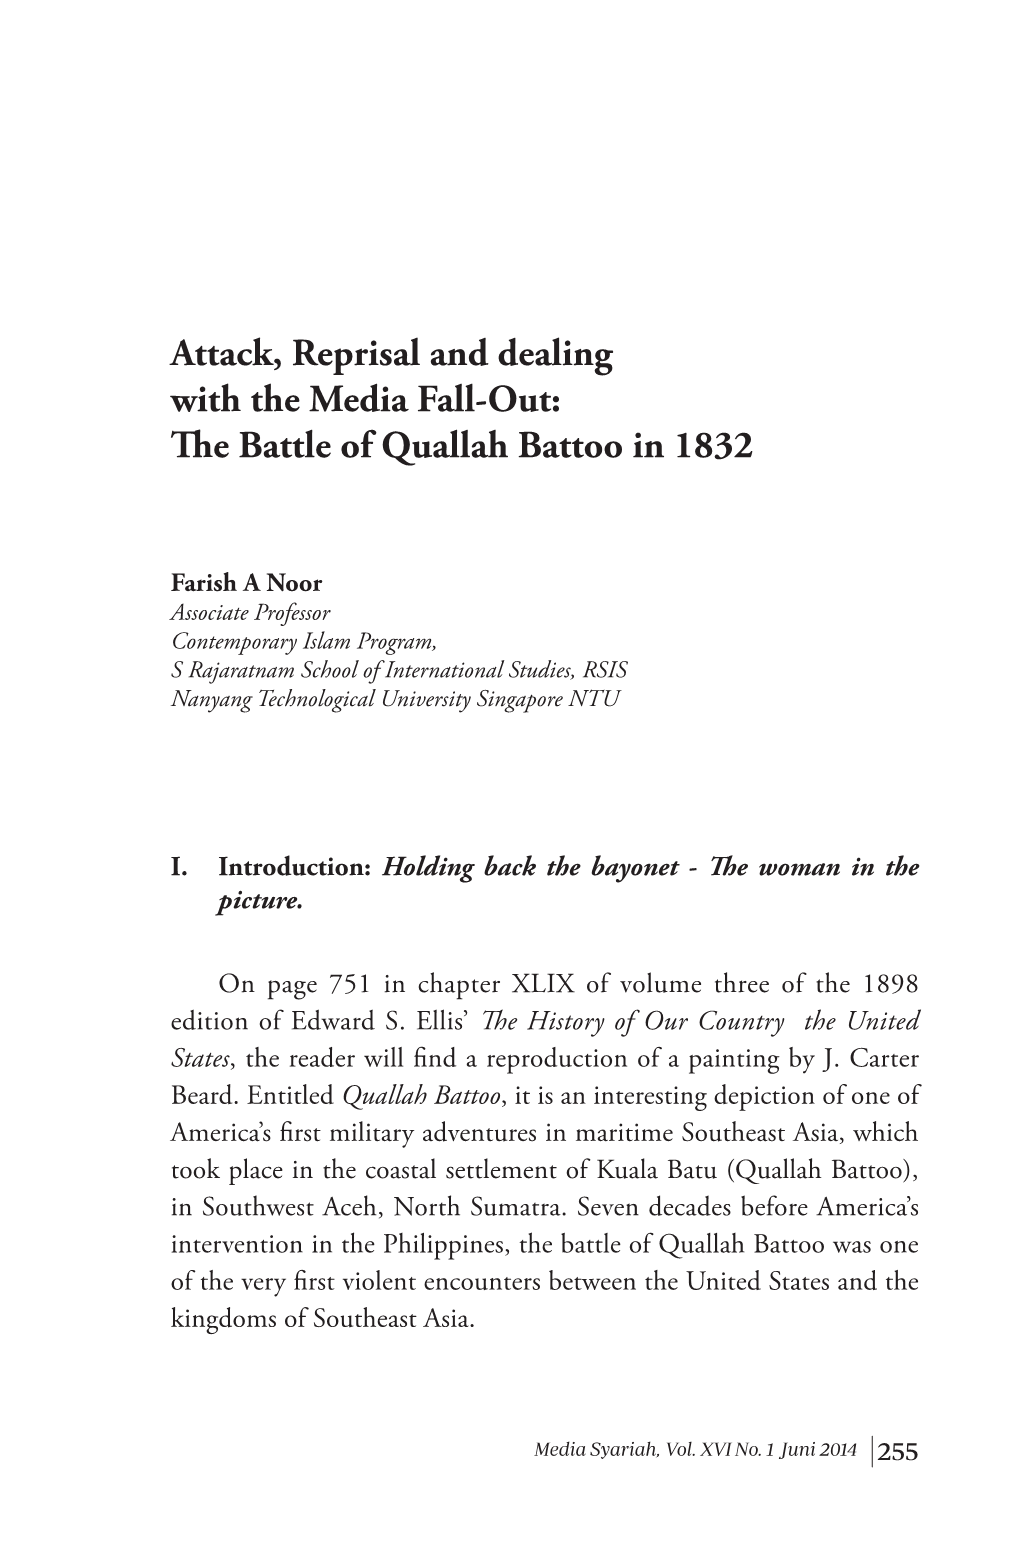 The Battle of Quallah Battoo in 1832